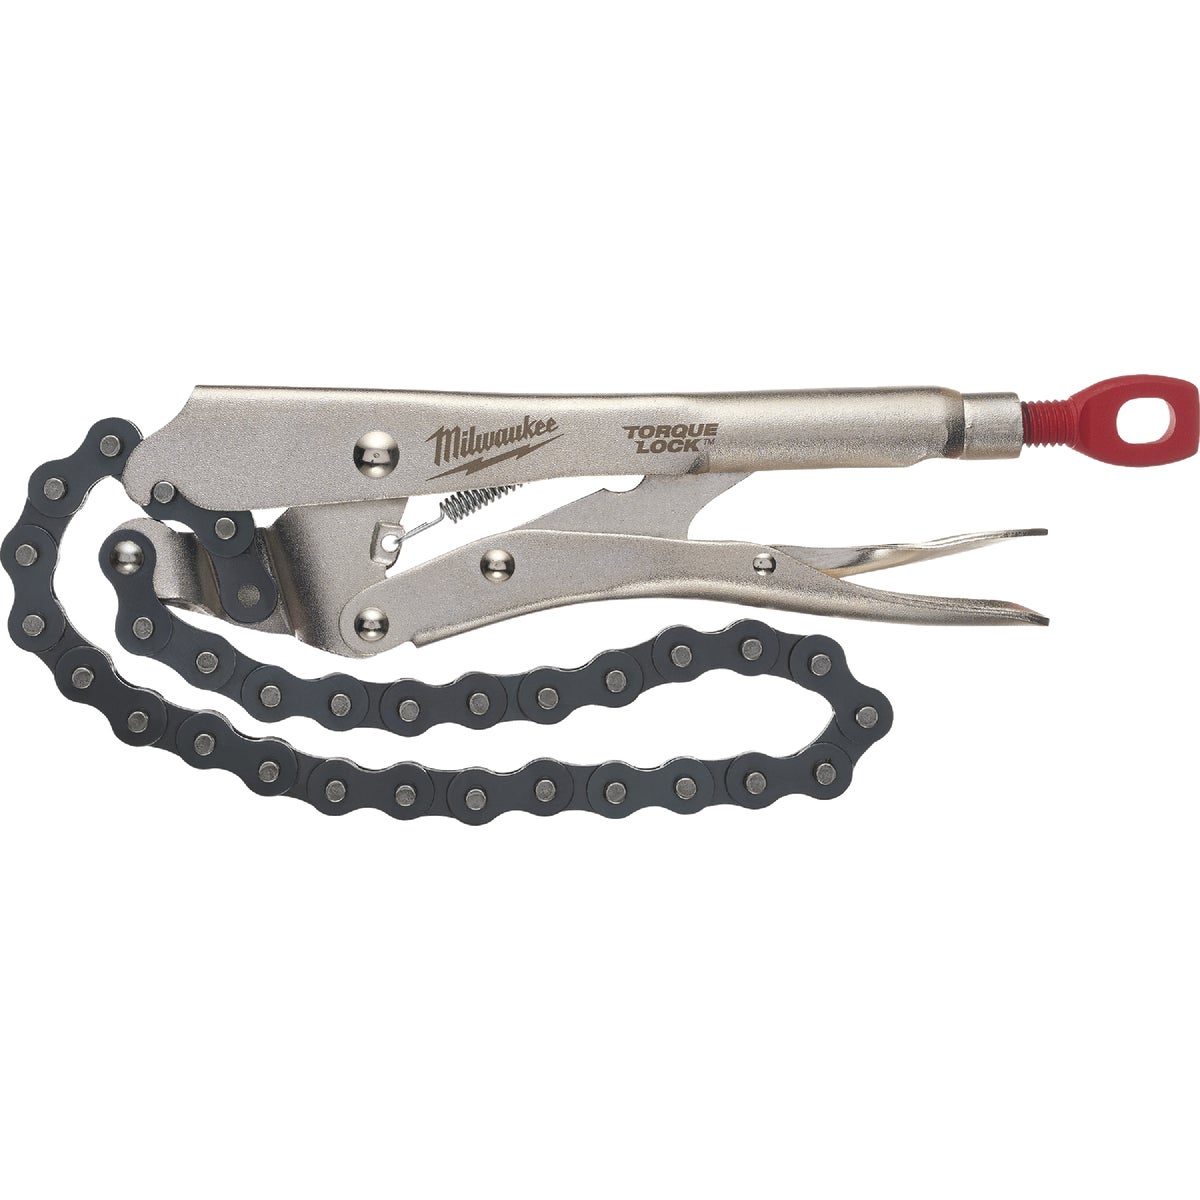 Item 303691, TORQUE LOCK provides faster tool setup, more locking force, and easy 